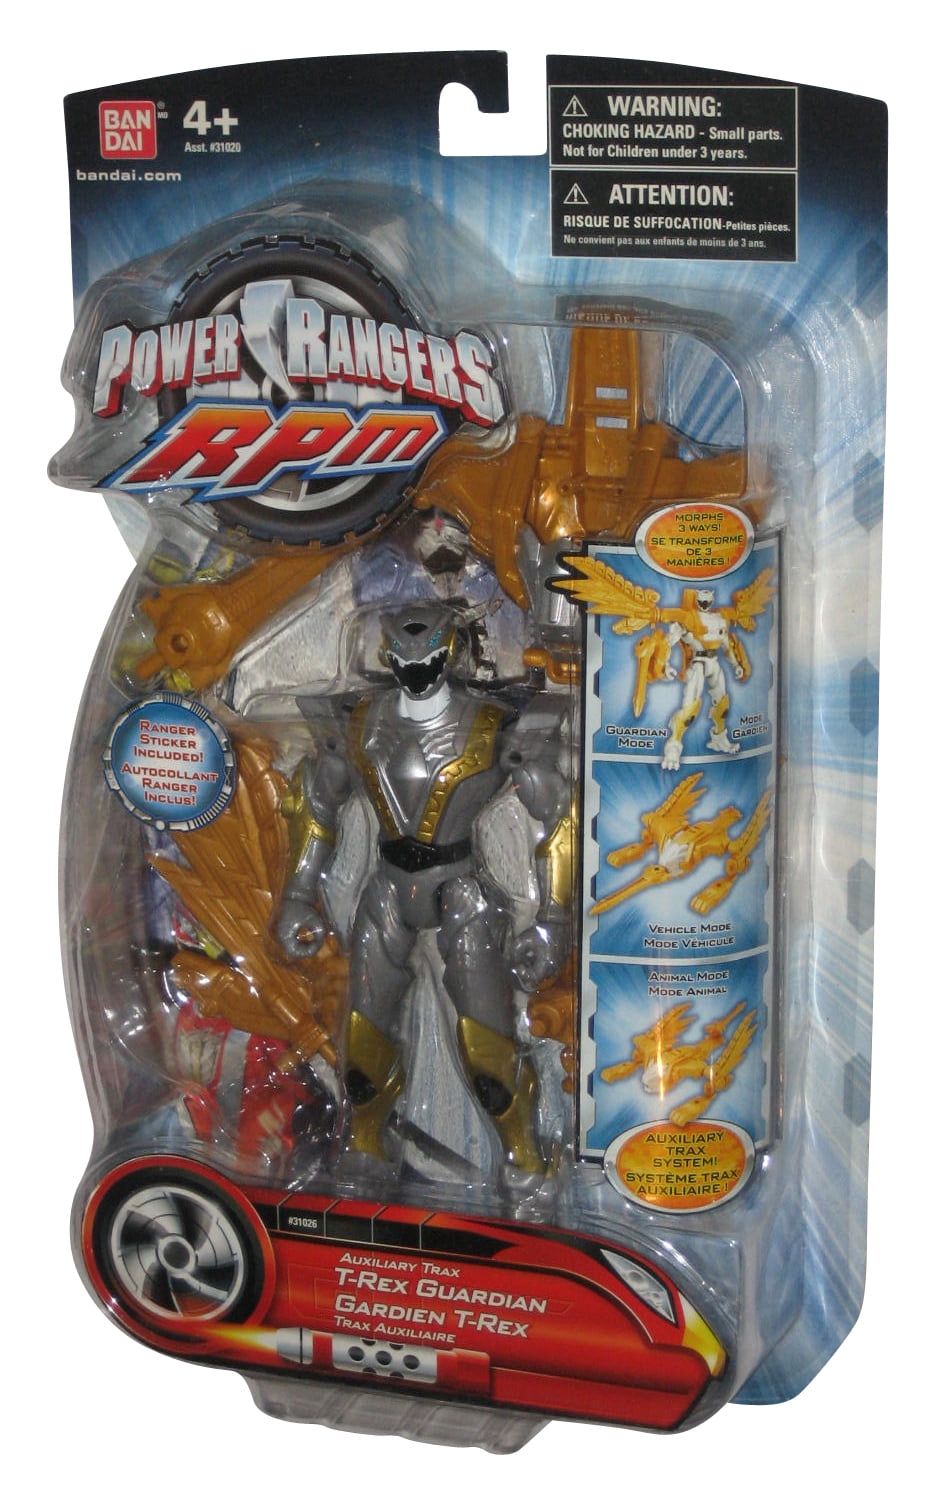 Turbo Octane Racer  CAR CHOOSE VARIOUS STYLES BY Bandai 2009 Details about   Power Rangers RPM 